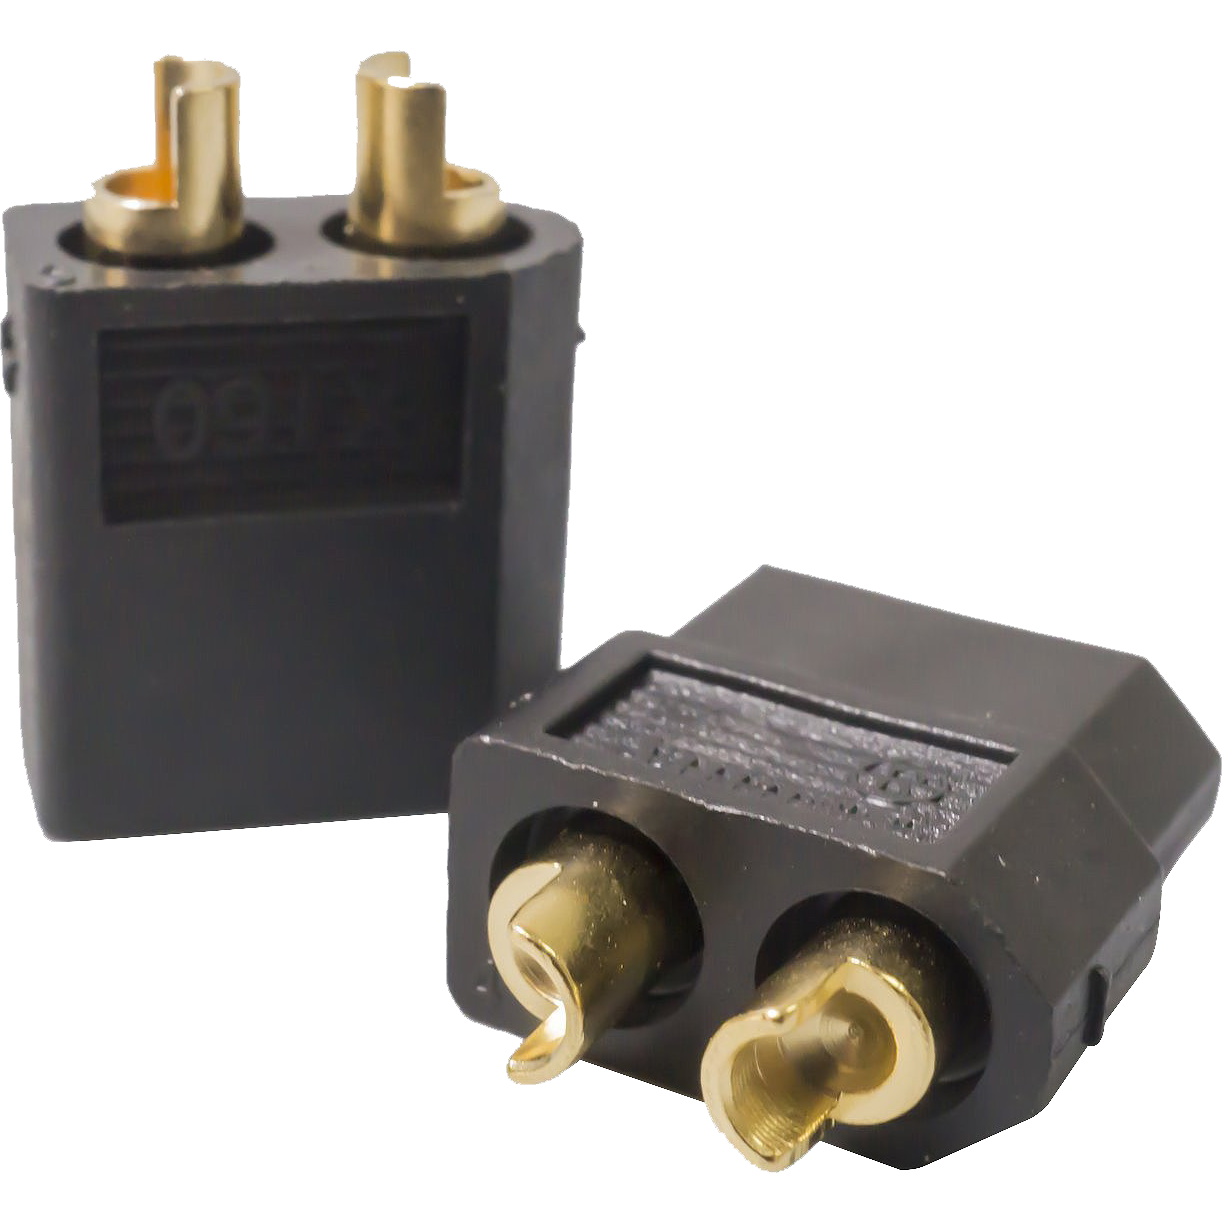 XT60 Connector Male and Female Pair